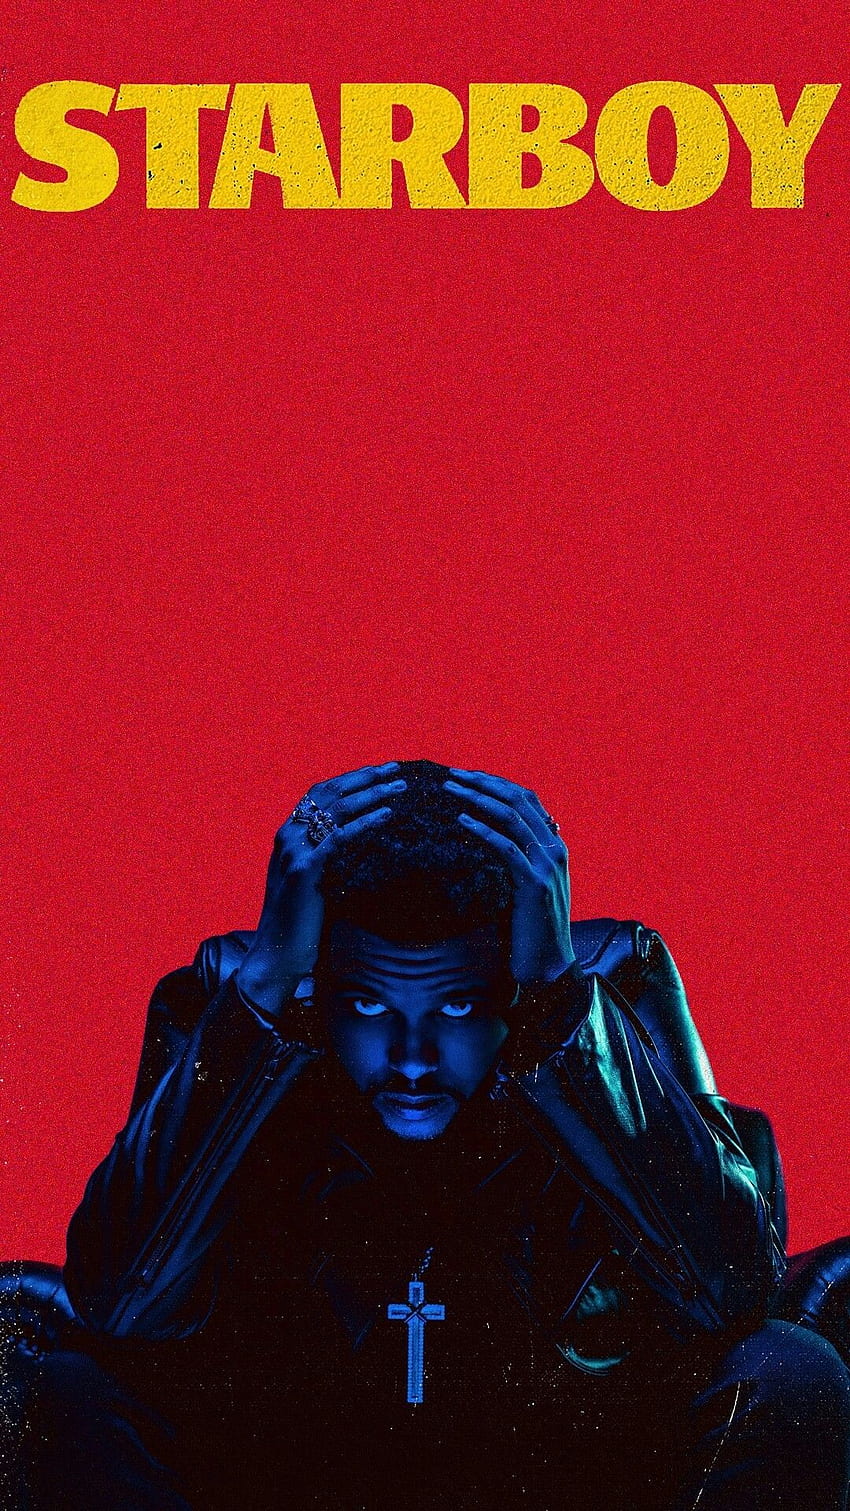 Dawn FM in 2022. The weeknd poster, The weeknd, The weeknd albums in 2022. The  weeknd poster, The weeknd albums, The weeknd album cover HD phone wallpaper